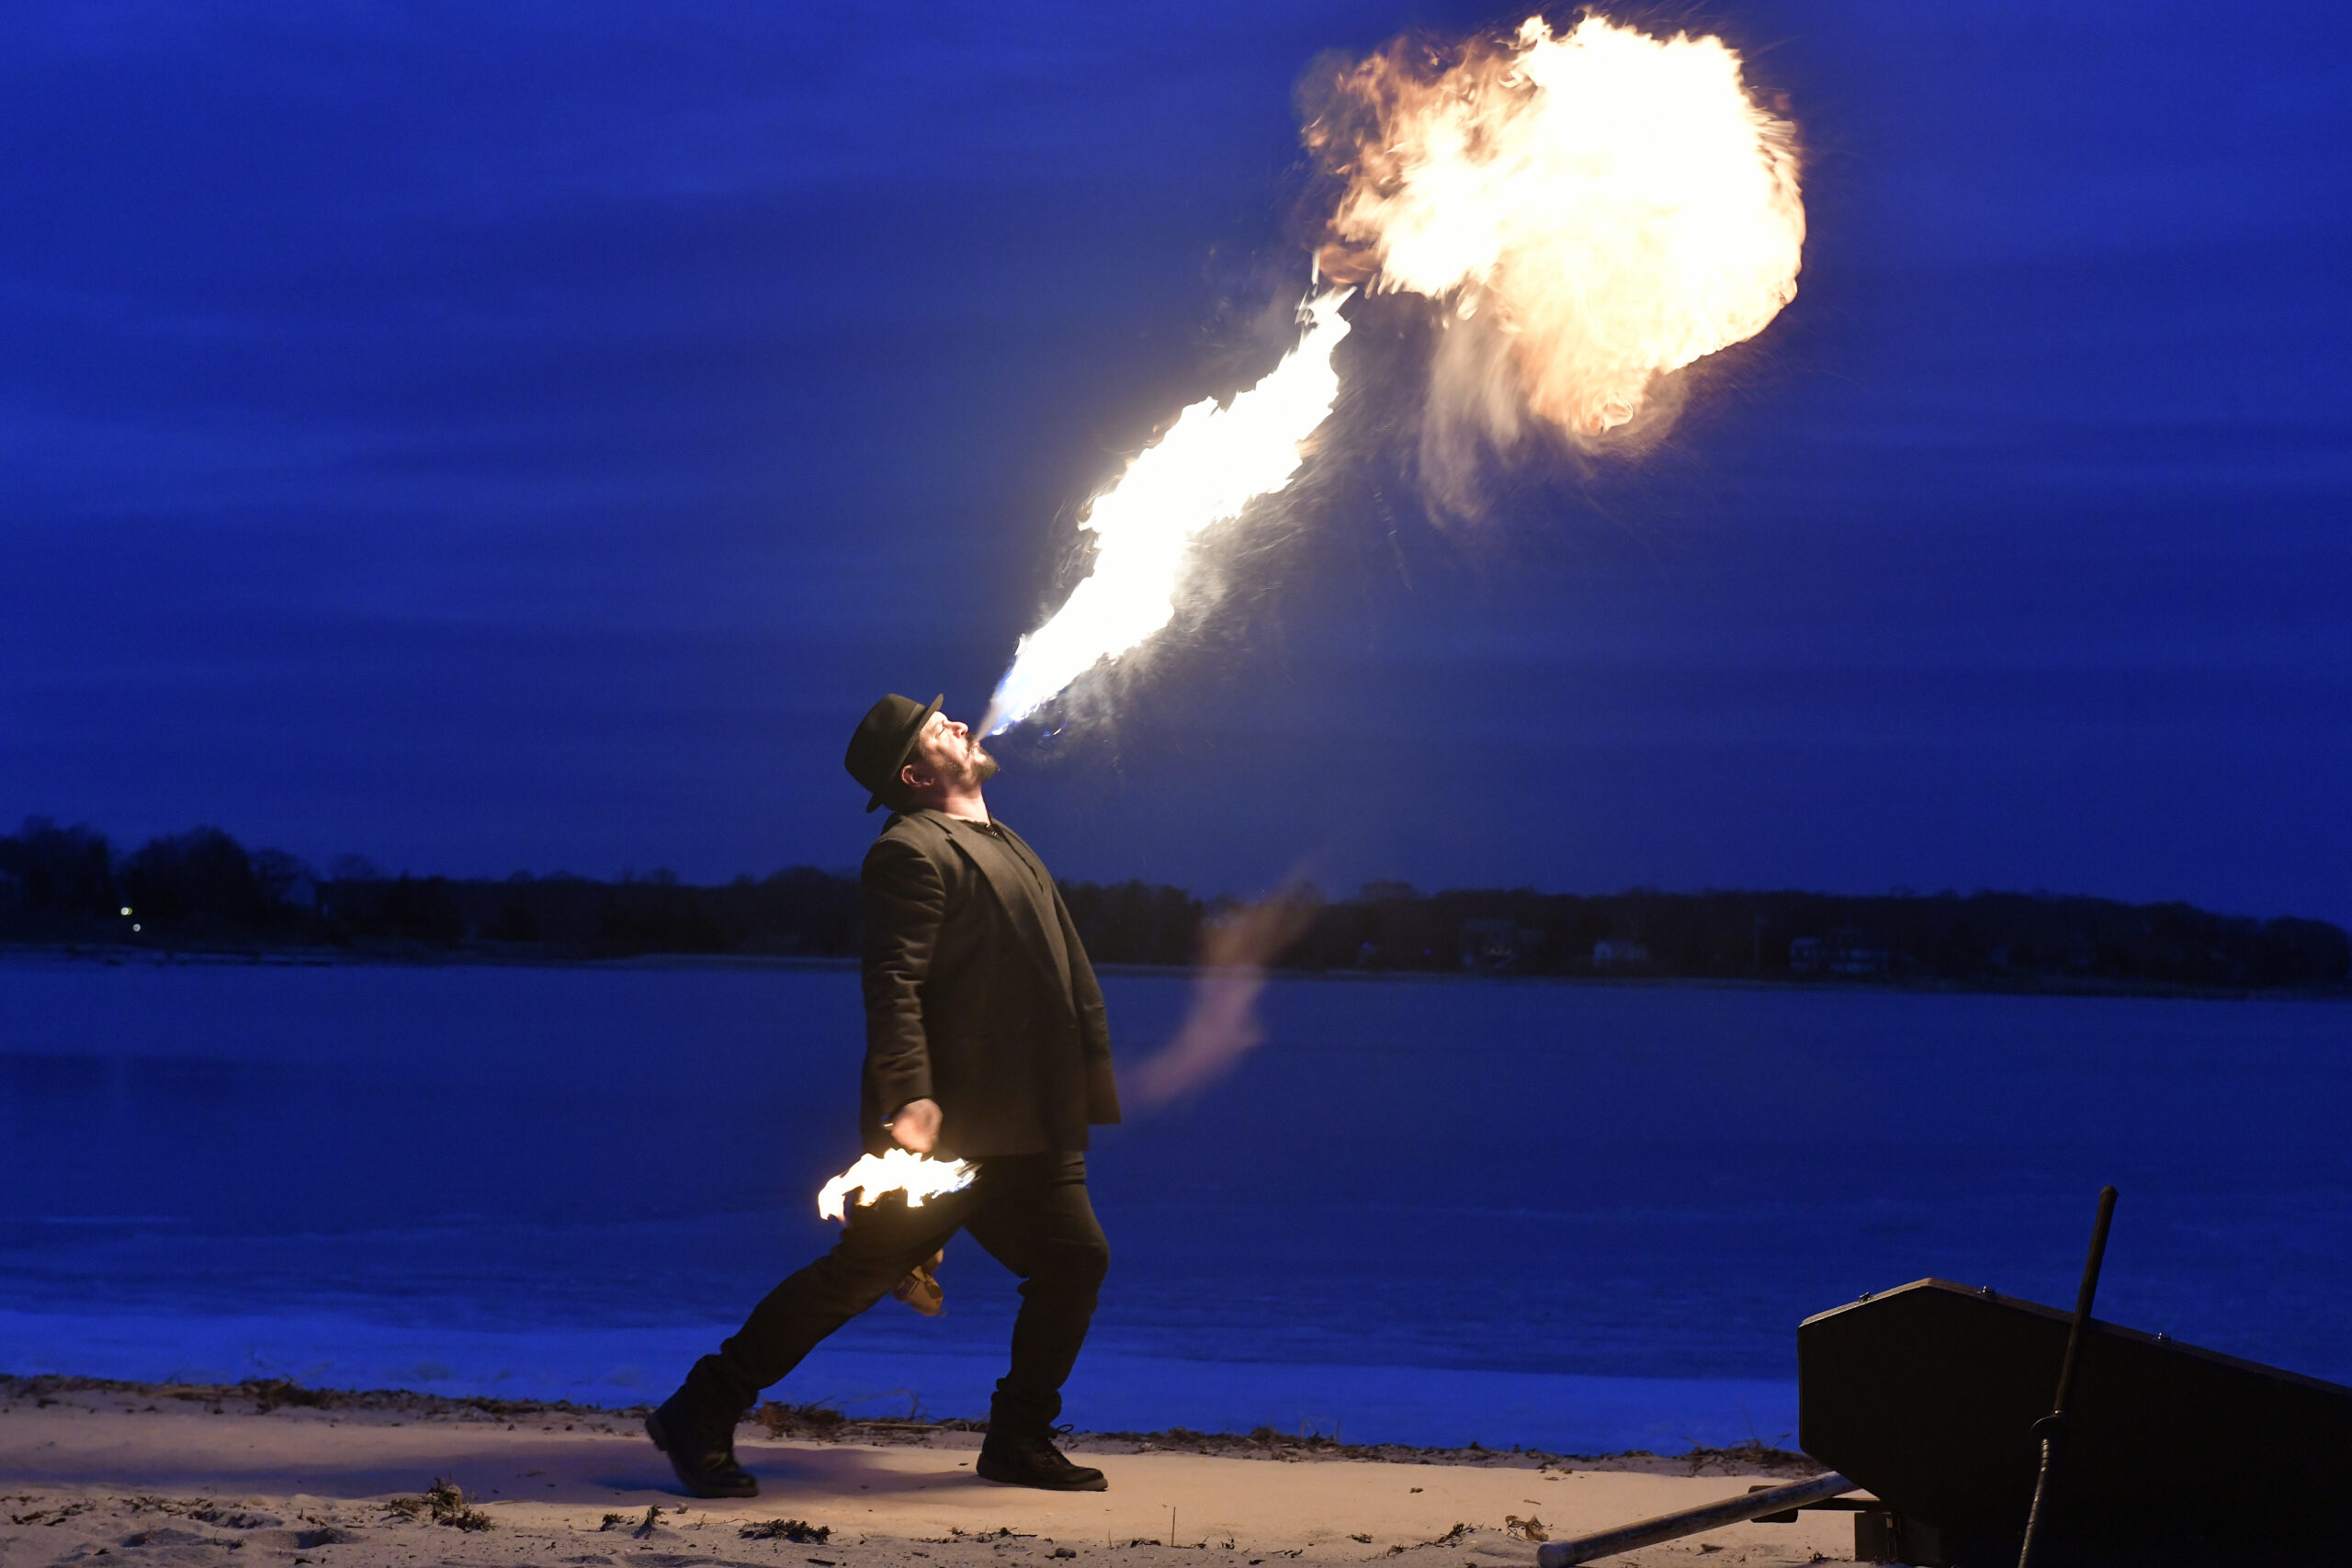 Rob Romeo spits fire during Fire Dancing by Keith Leaf and His Flaming Friends at Windmill Beach on Saturday evening.   DANA SHAW